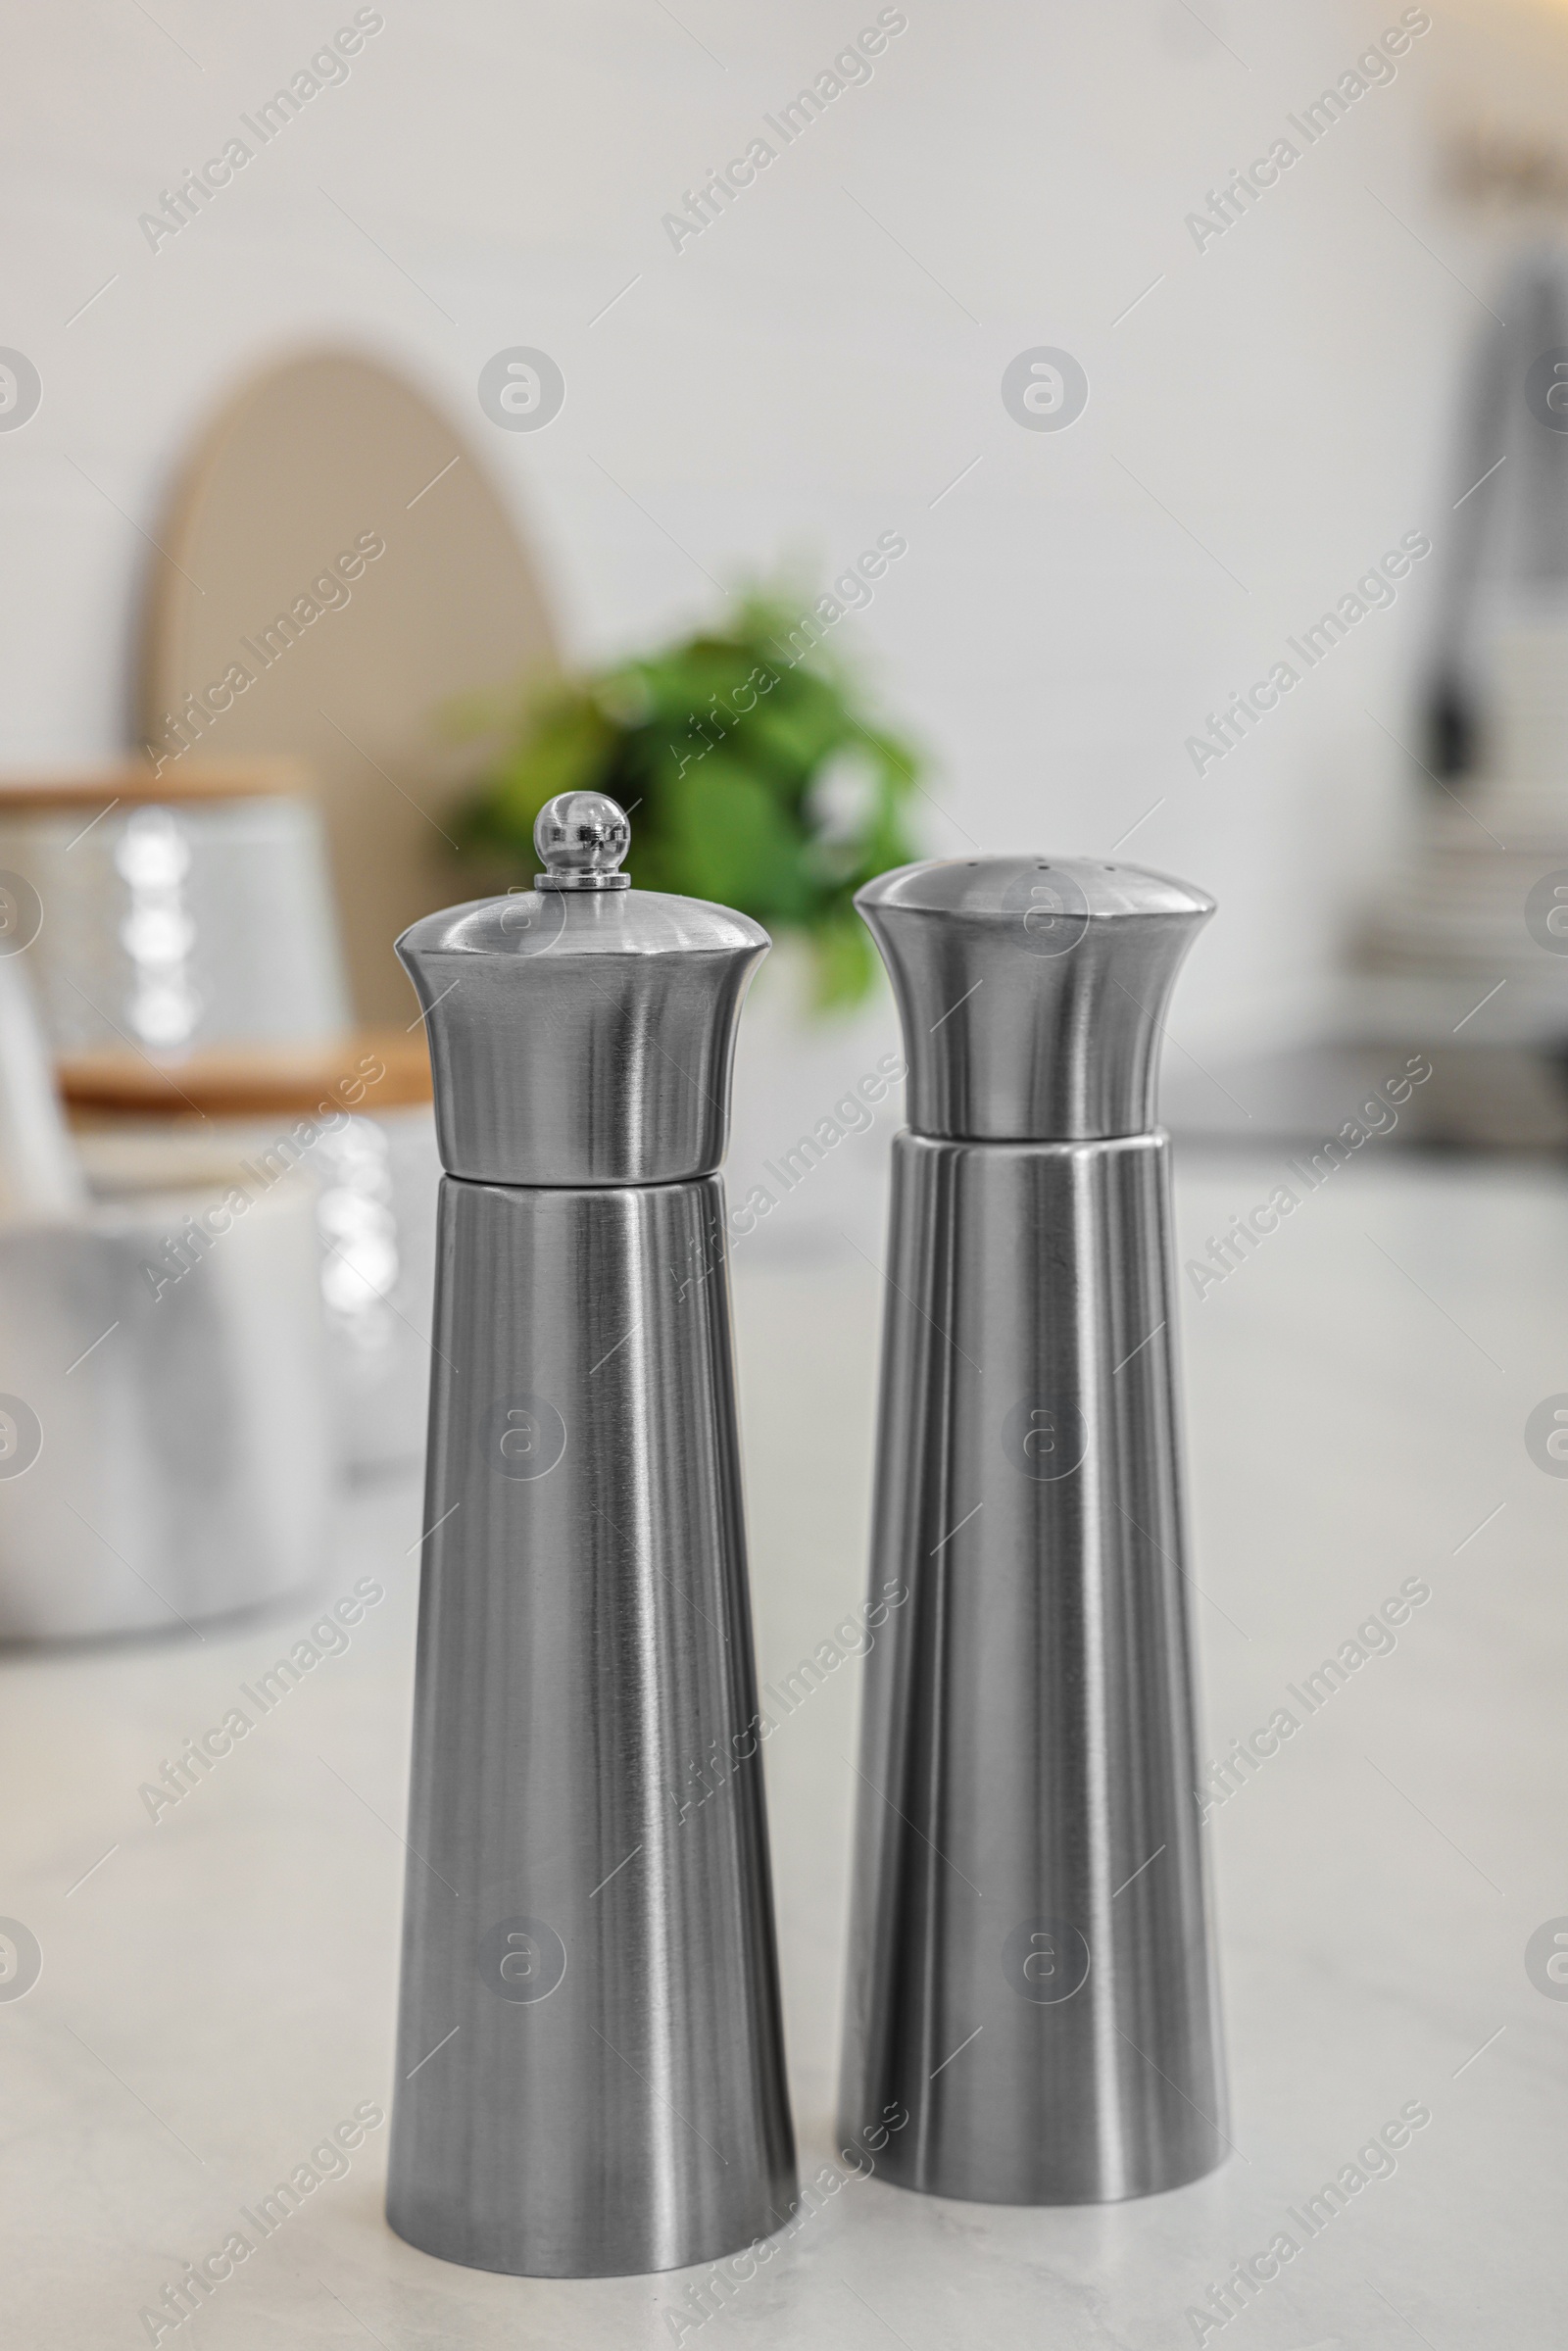 Photo of Stainless steel salt and pepper shakers on table